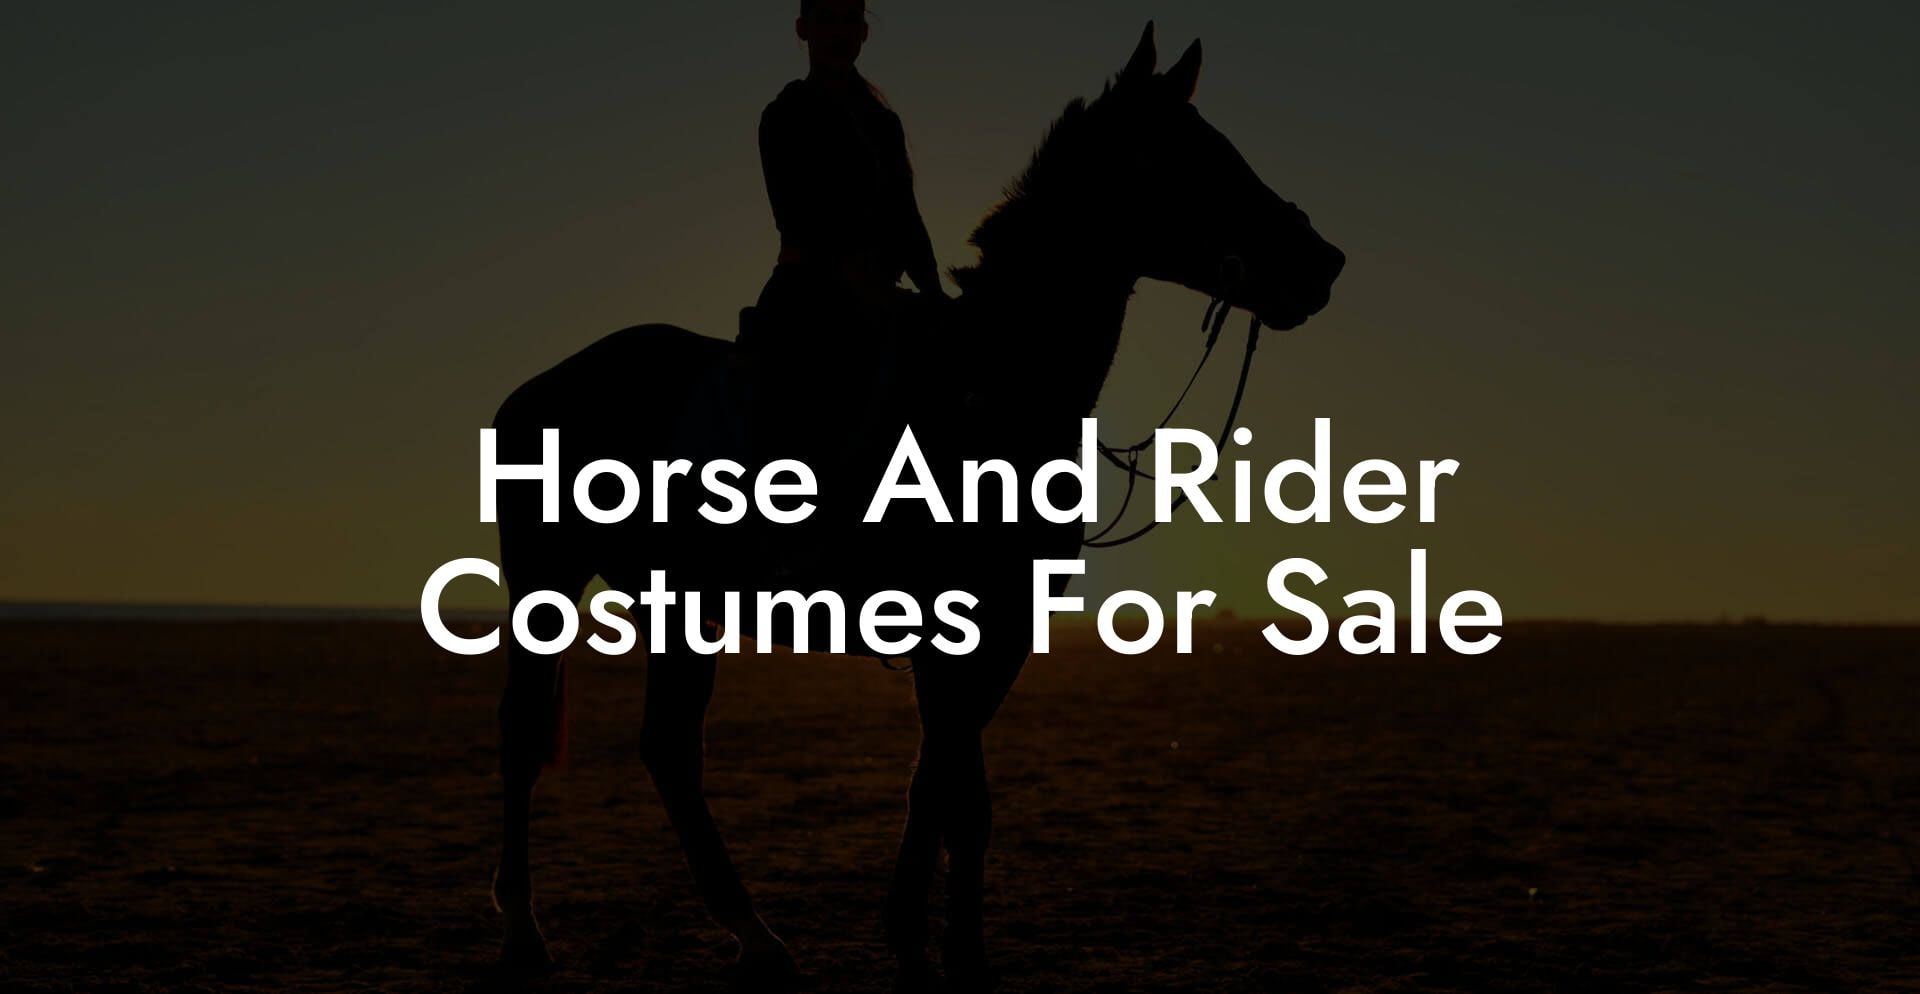 Horse And Rider Costumes For Sale